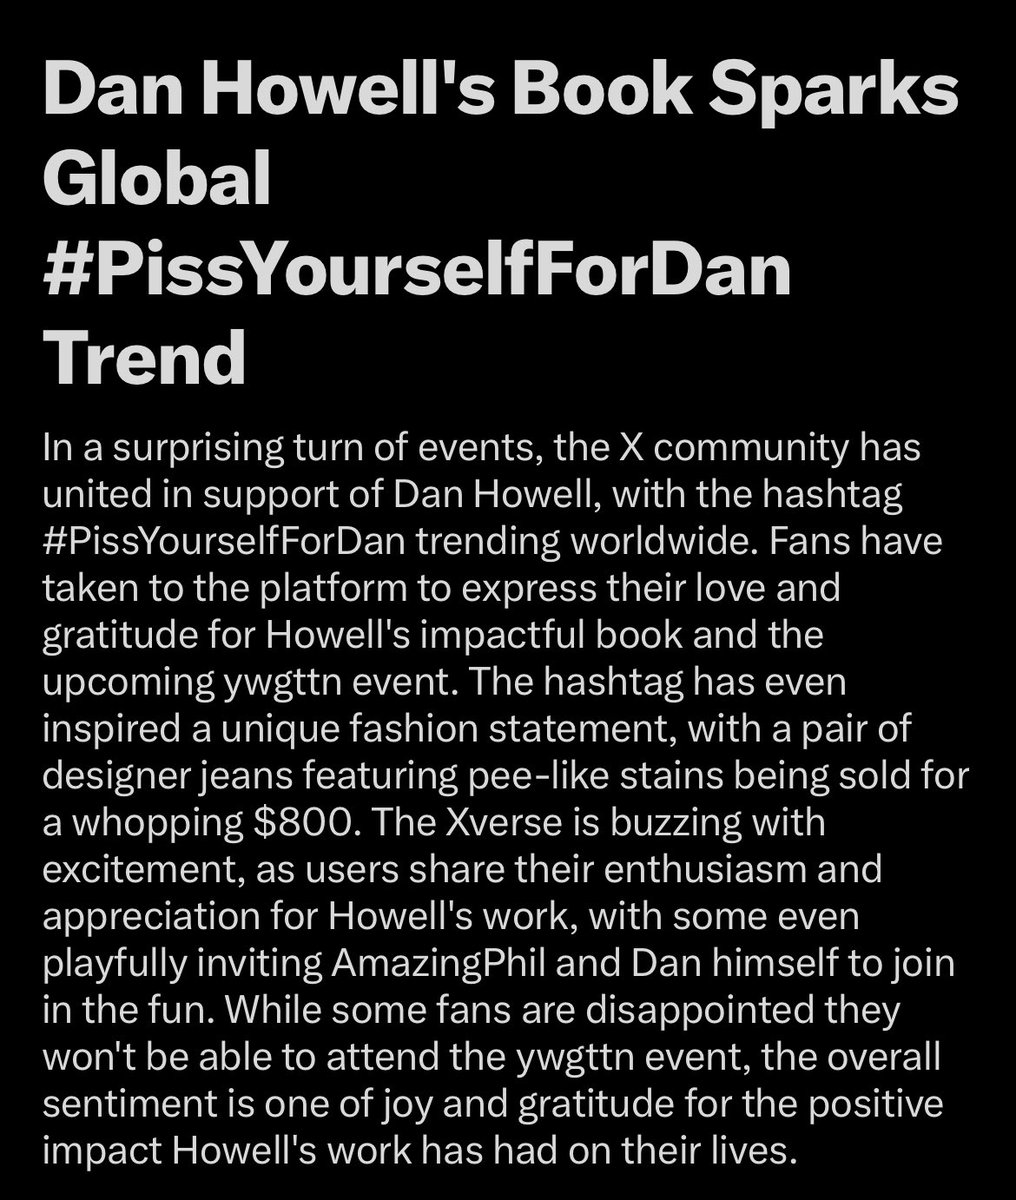 Daniel Howell’s global impact💛 as told by Grok…